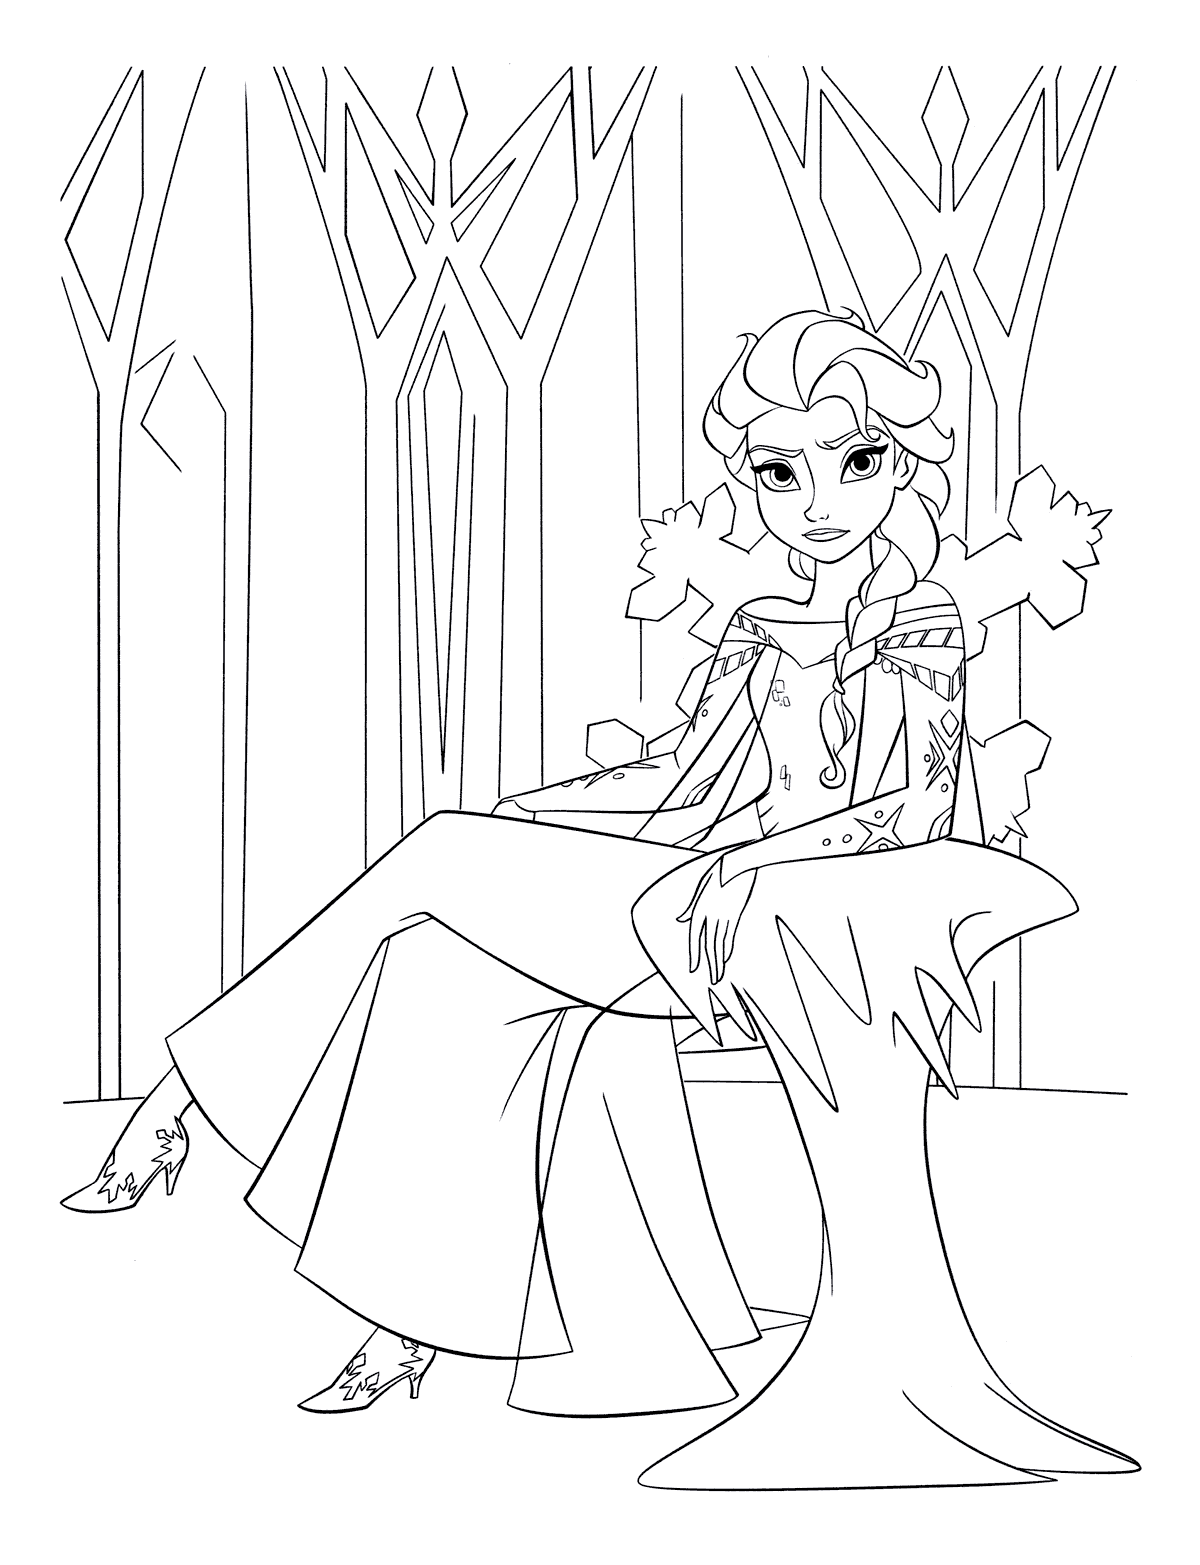 Coloring page - Queen Elsa of Arendelle